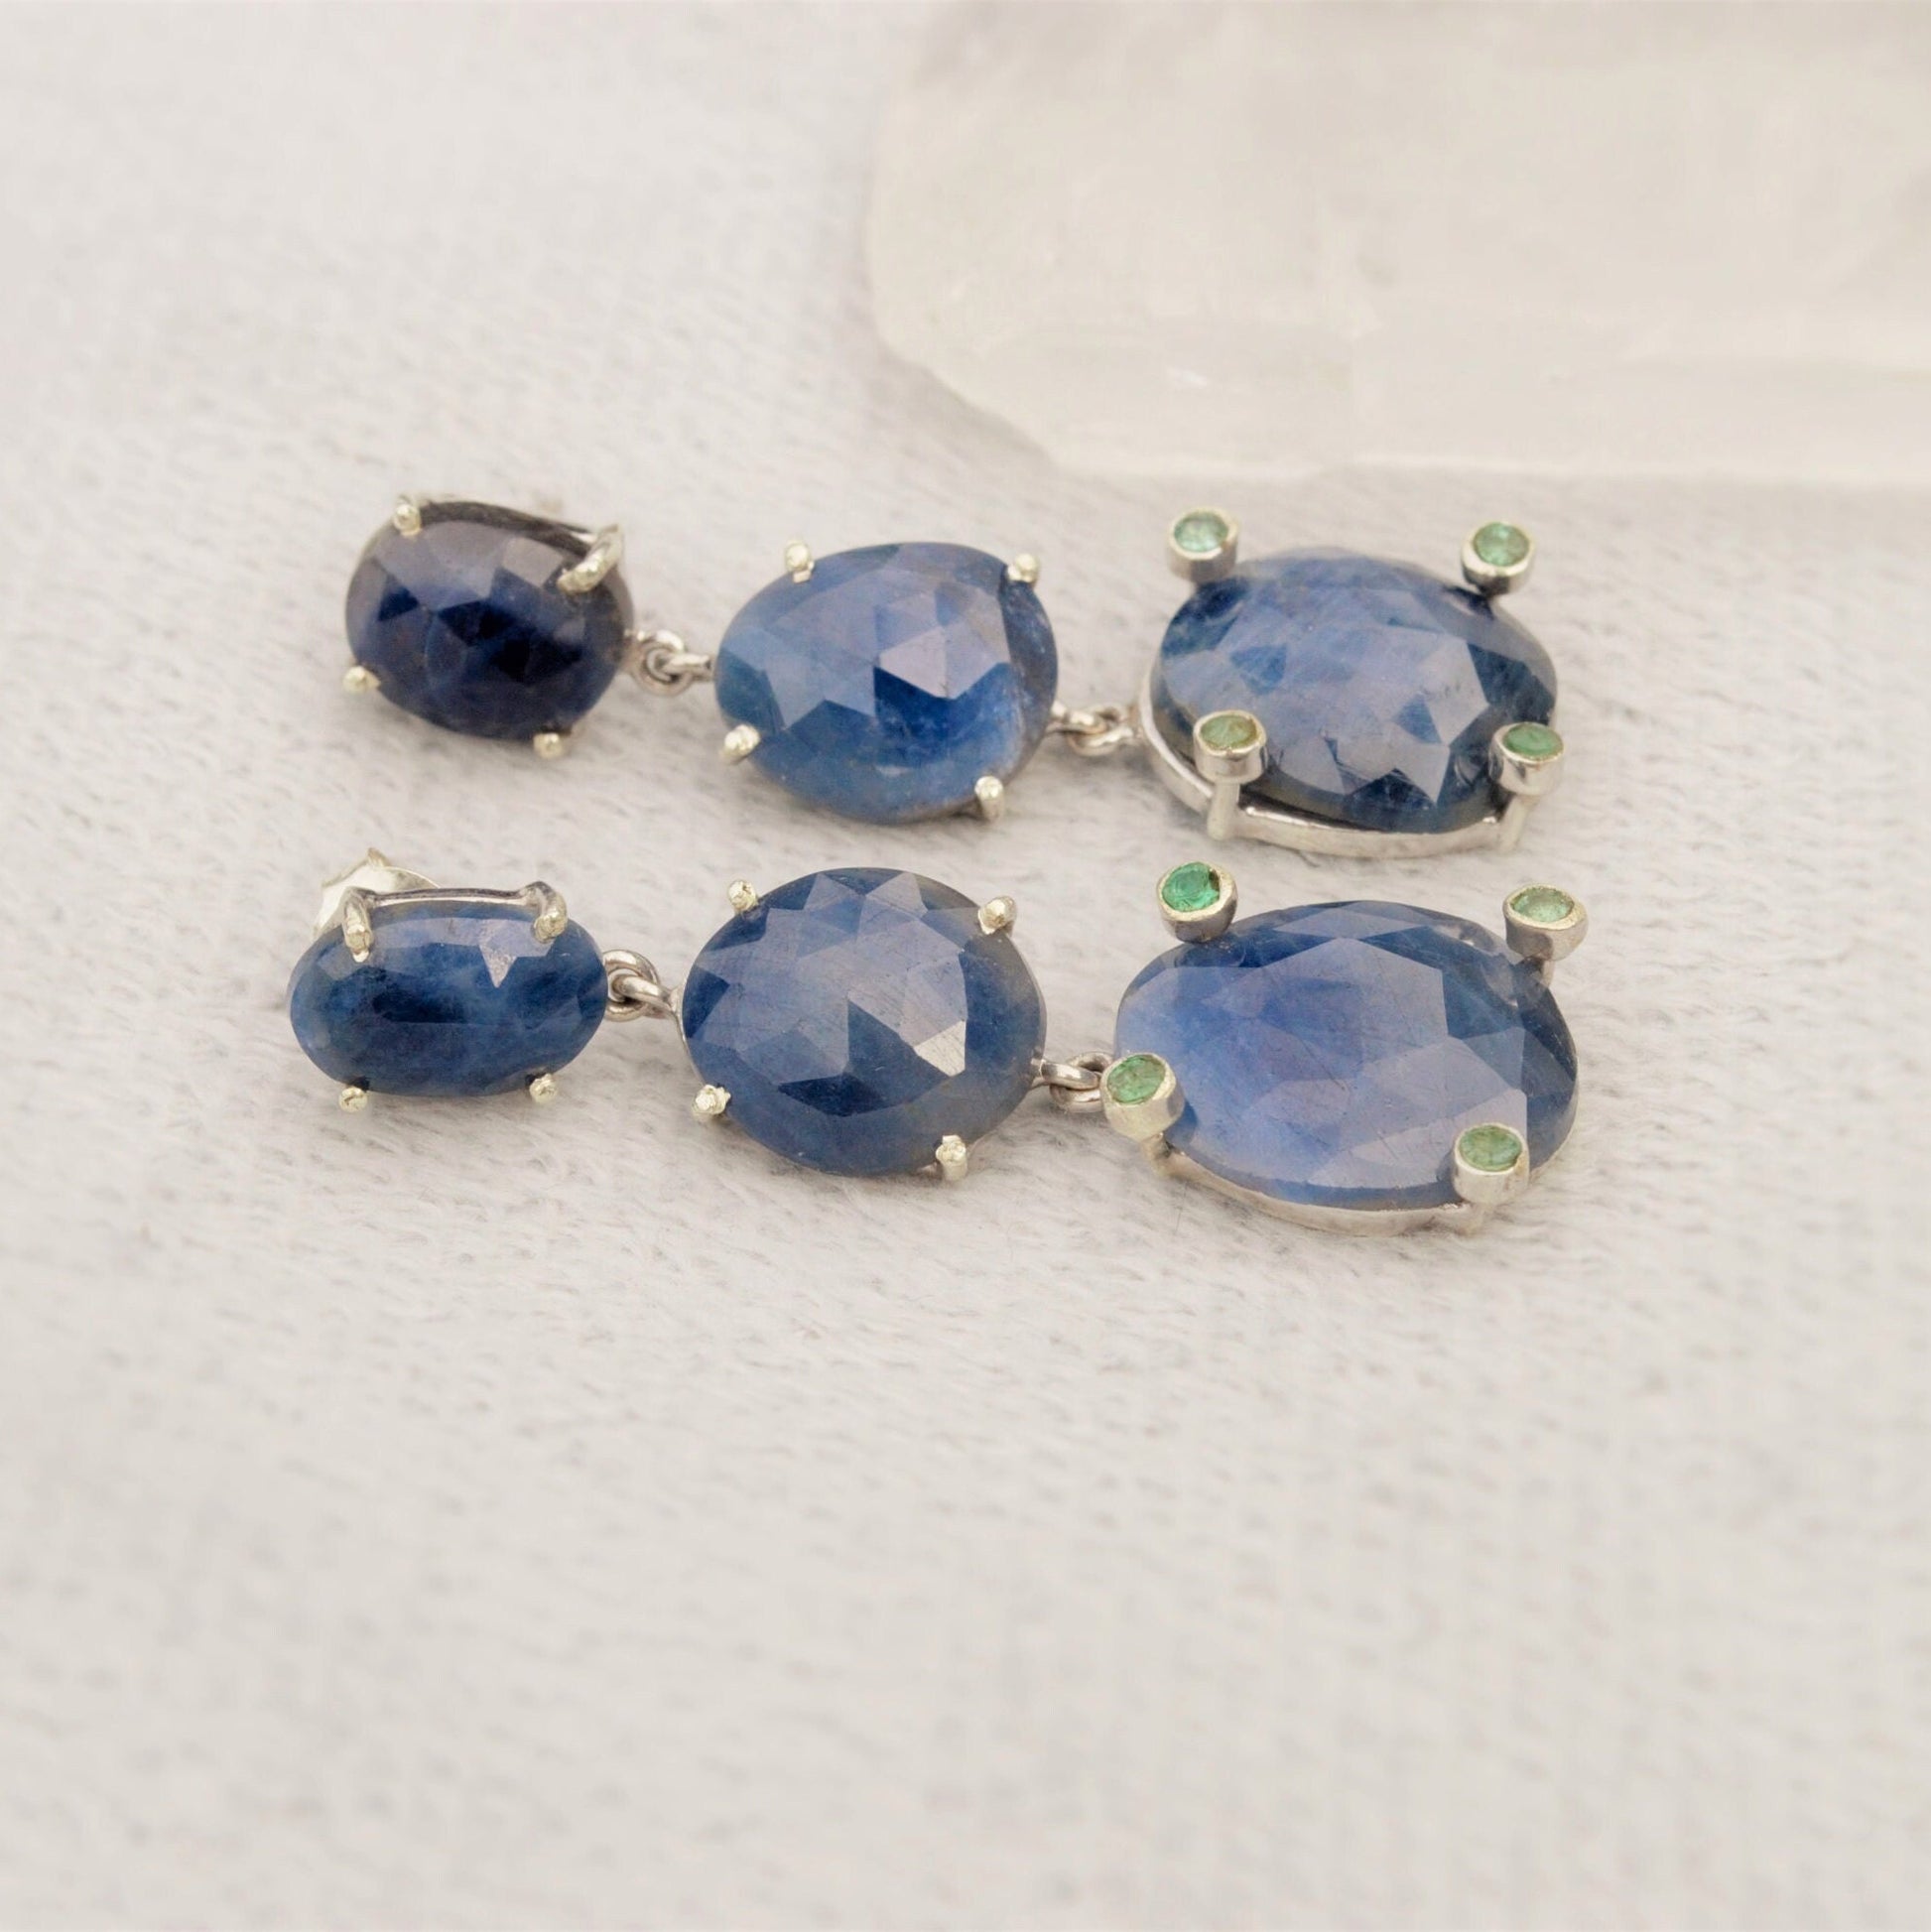 Sapphire and Emerald Earrings, Sterling Silver, Blue Sapphire Jewelry, Emerald Jewelry, May, September Birthstone, Birthday Gift For Her